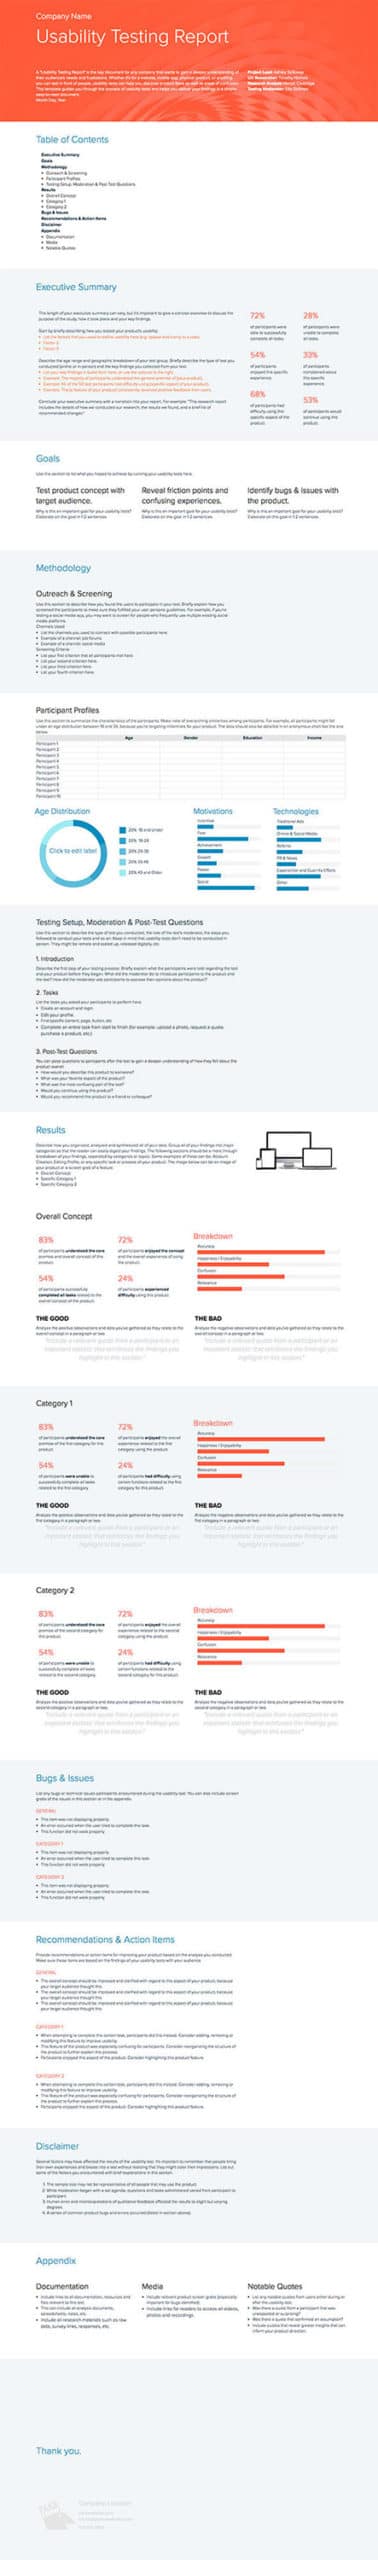 Usability Testing Report Template